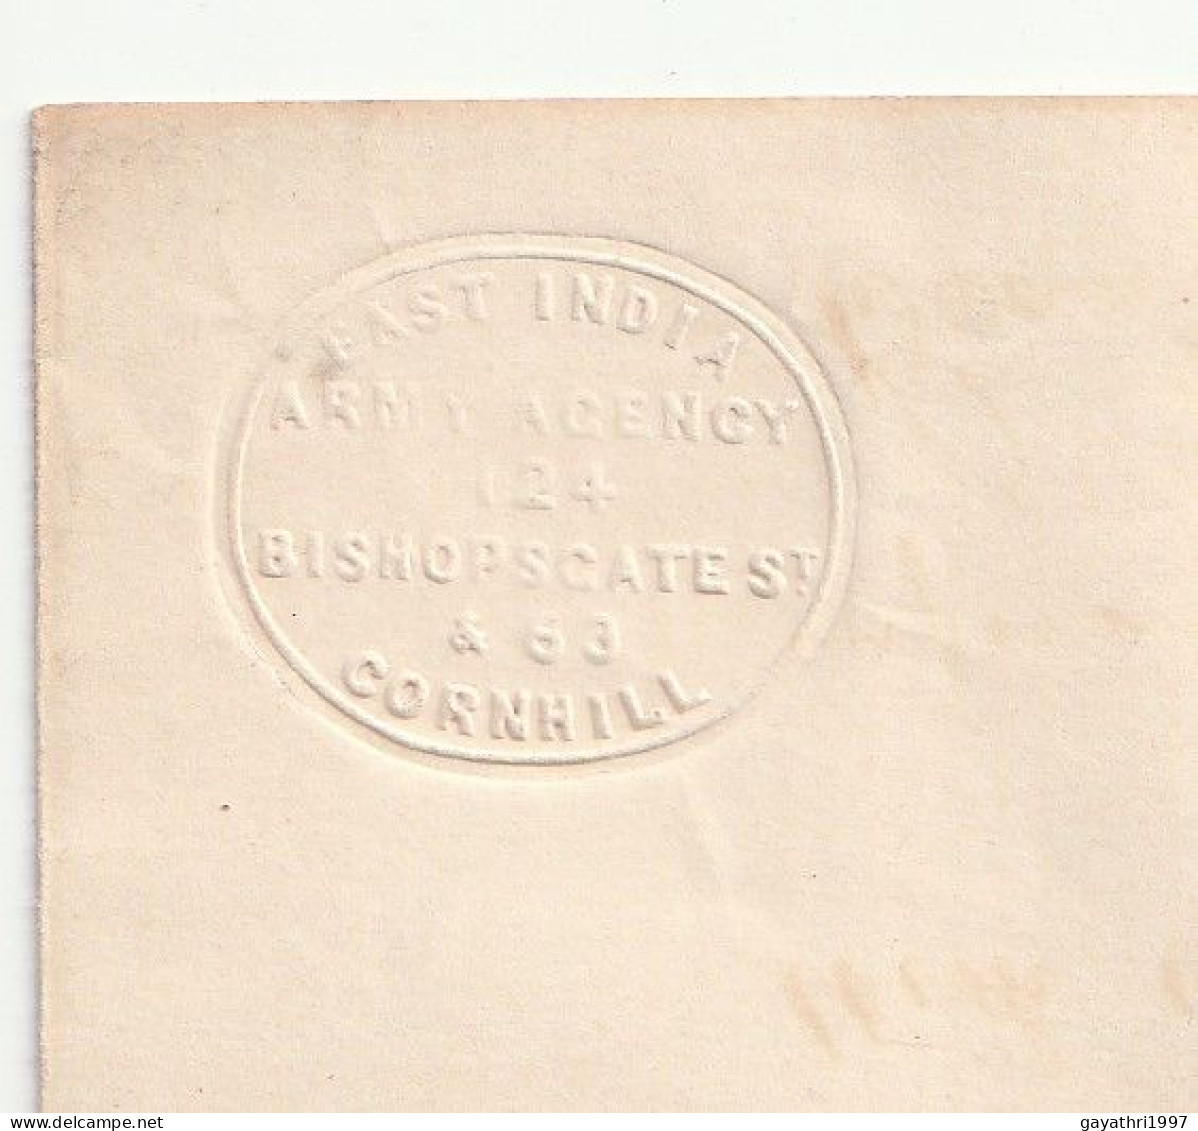 Great Britain 1850 1 Penny Red Color Stamp On Cover From( East India Letter Head ) Post Mark Mark 52 Good Condition (B14 - Covers & Documents